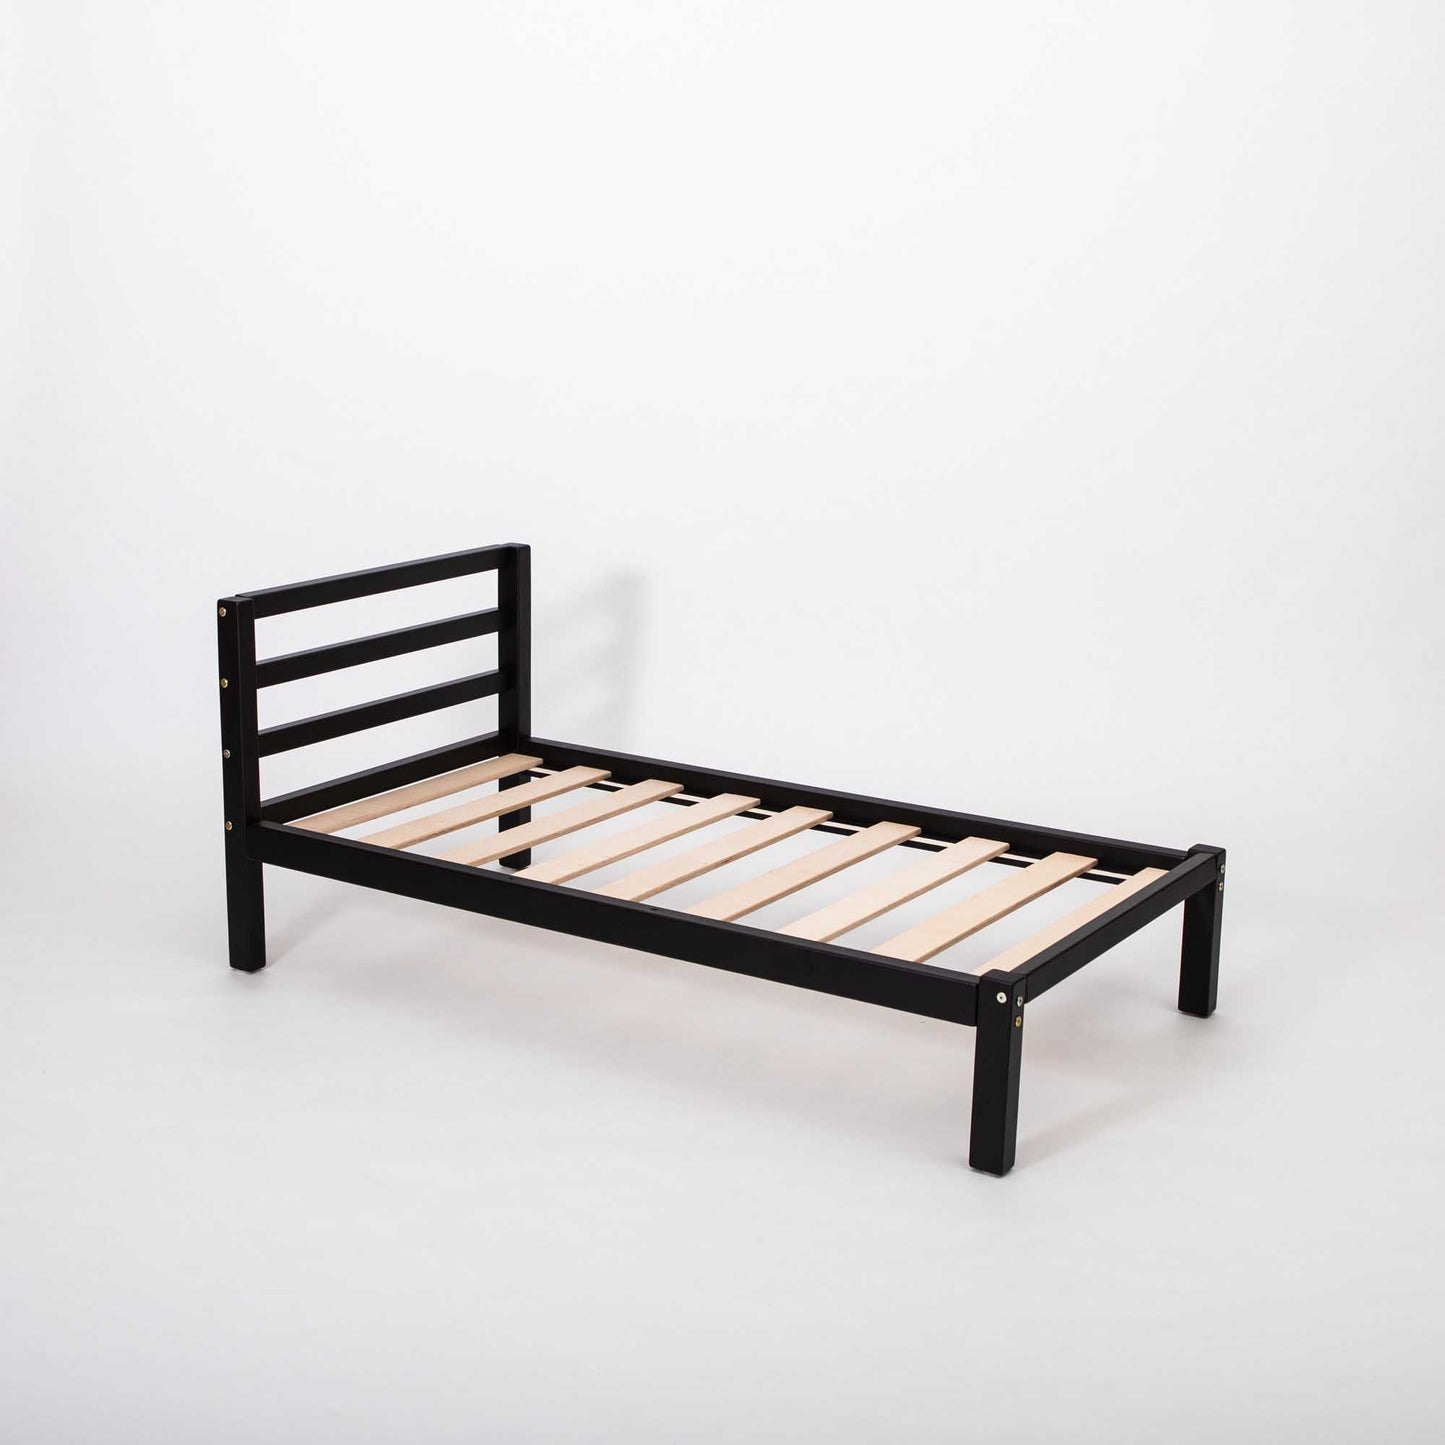 A sturdy black Kids' bed on legs with a horizontal rail headboard with wooden slats against a white background by Sweet Home From Wood.